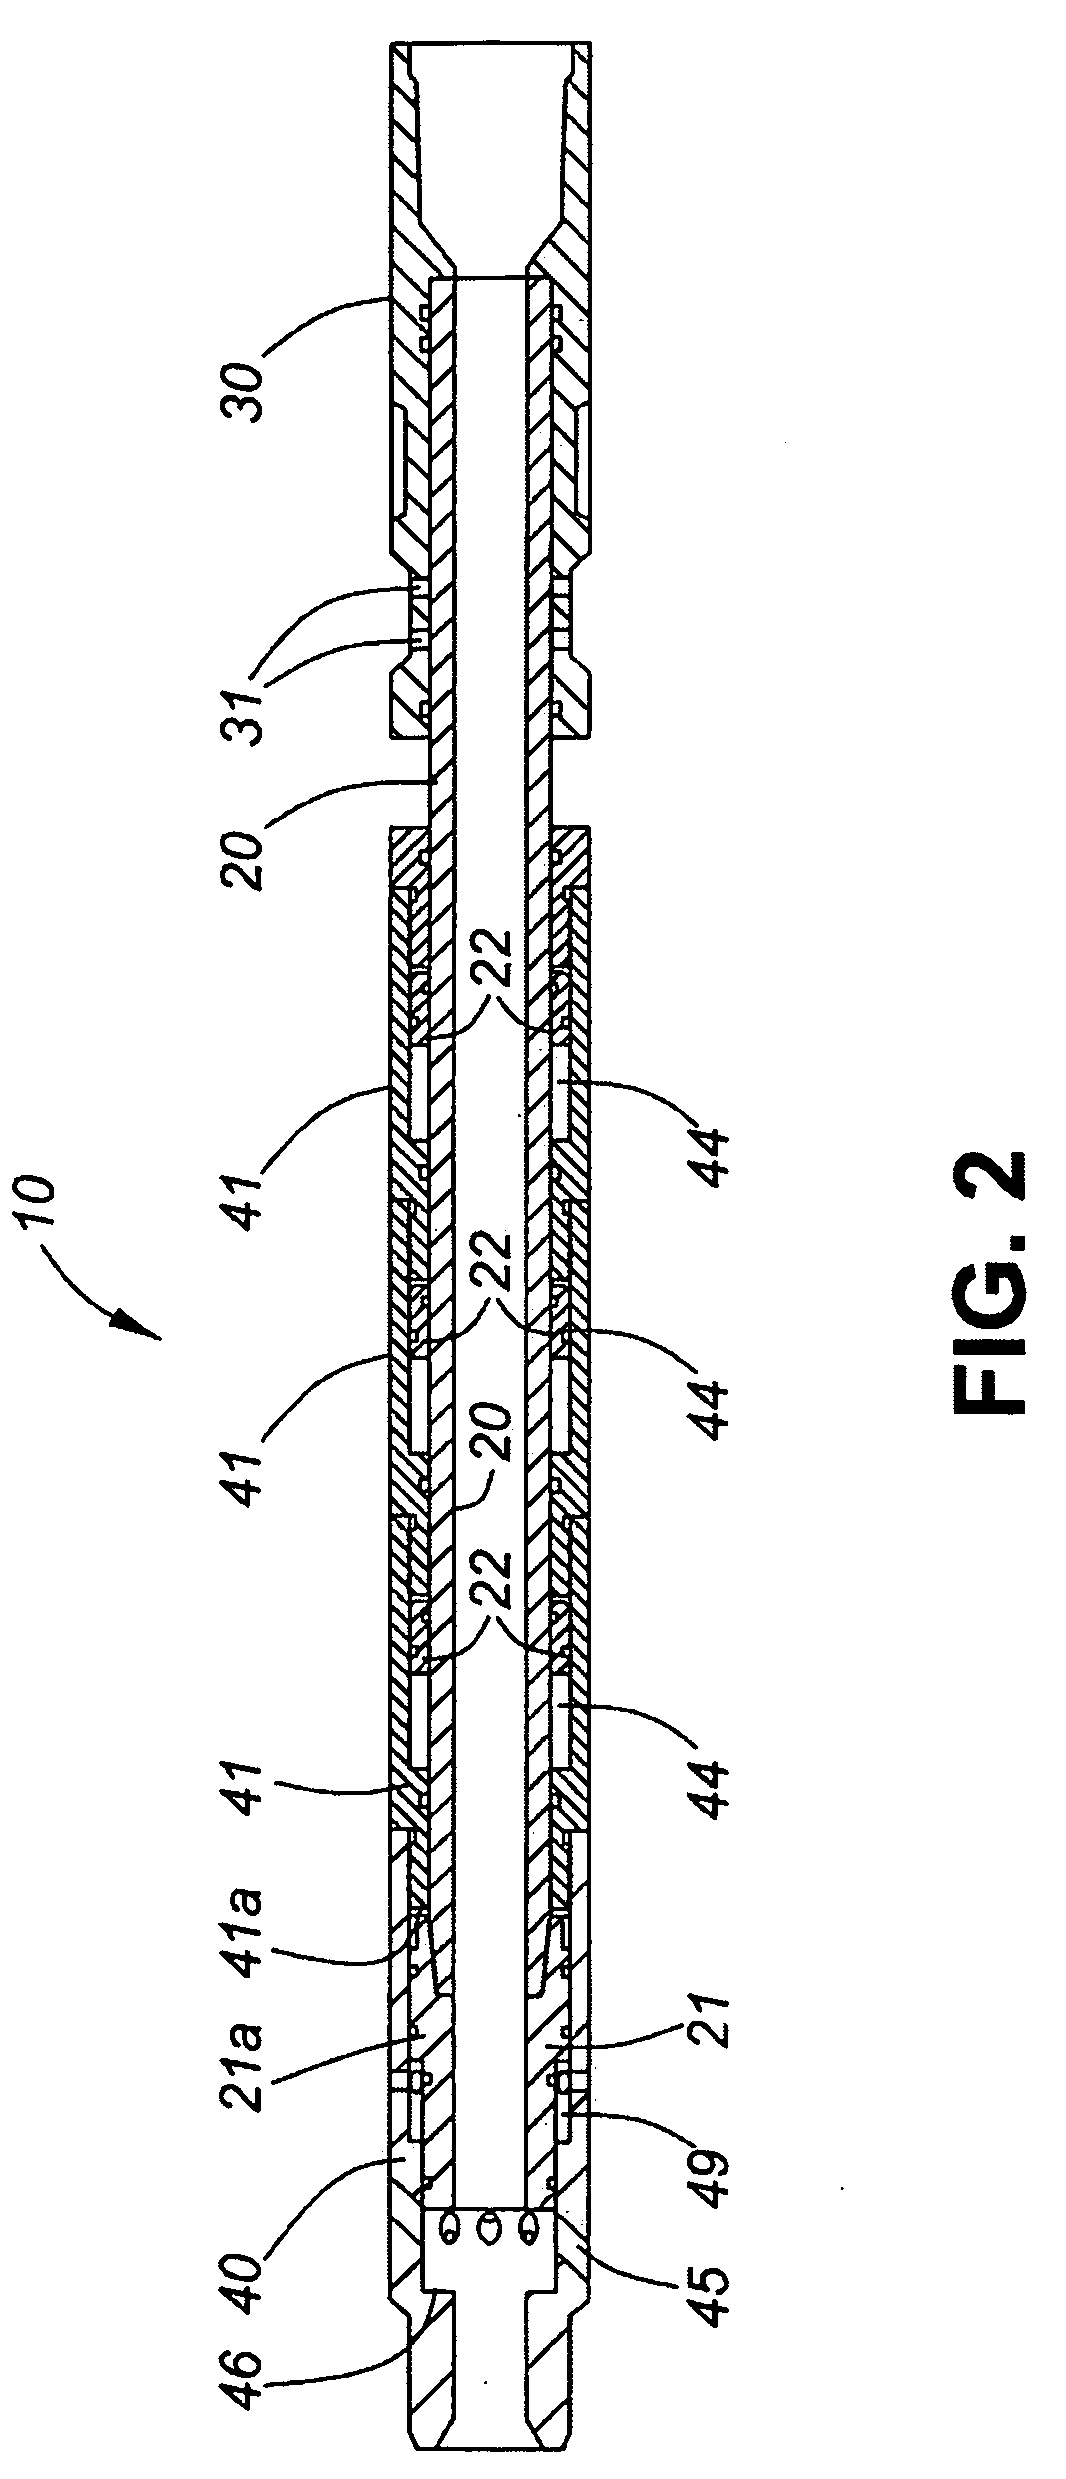 Staged Actuation Shear Sub for Use Downhole